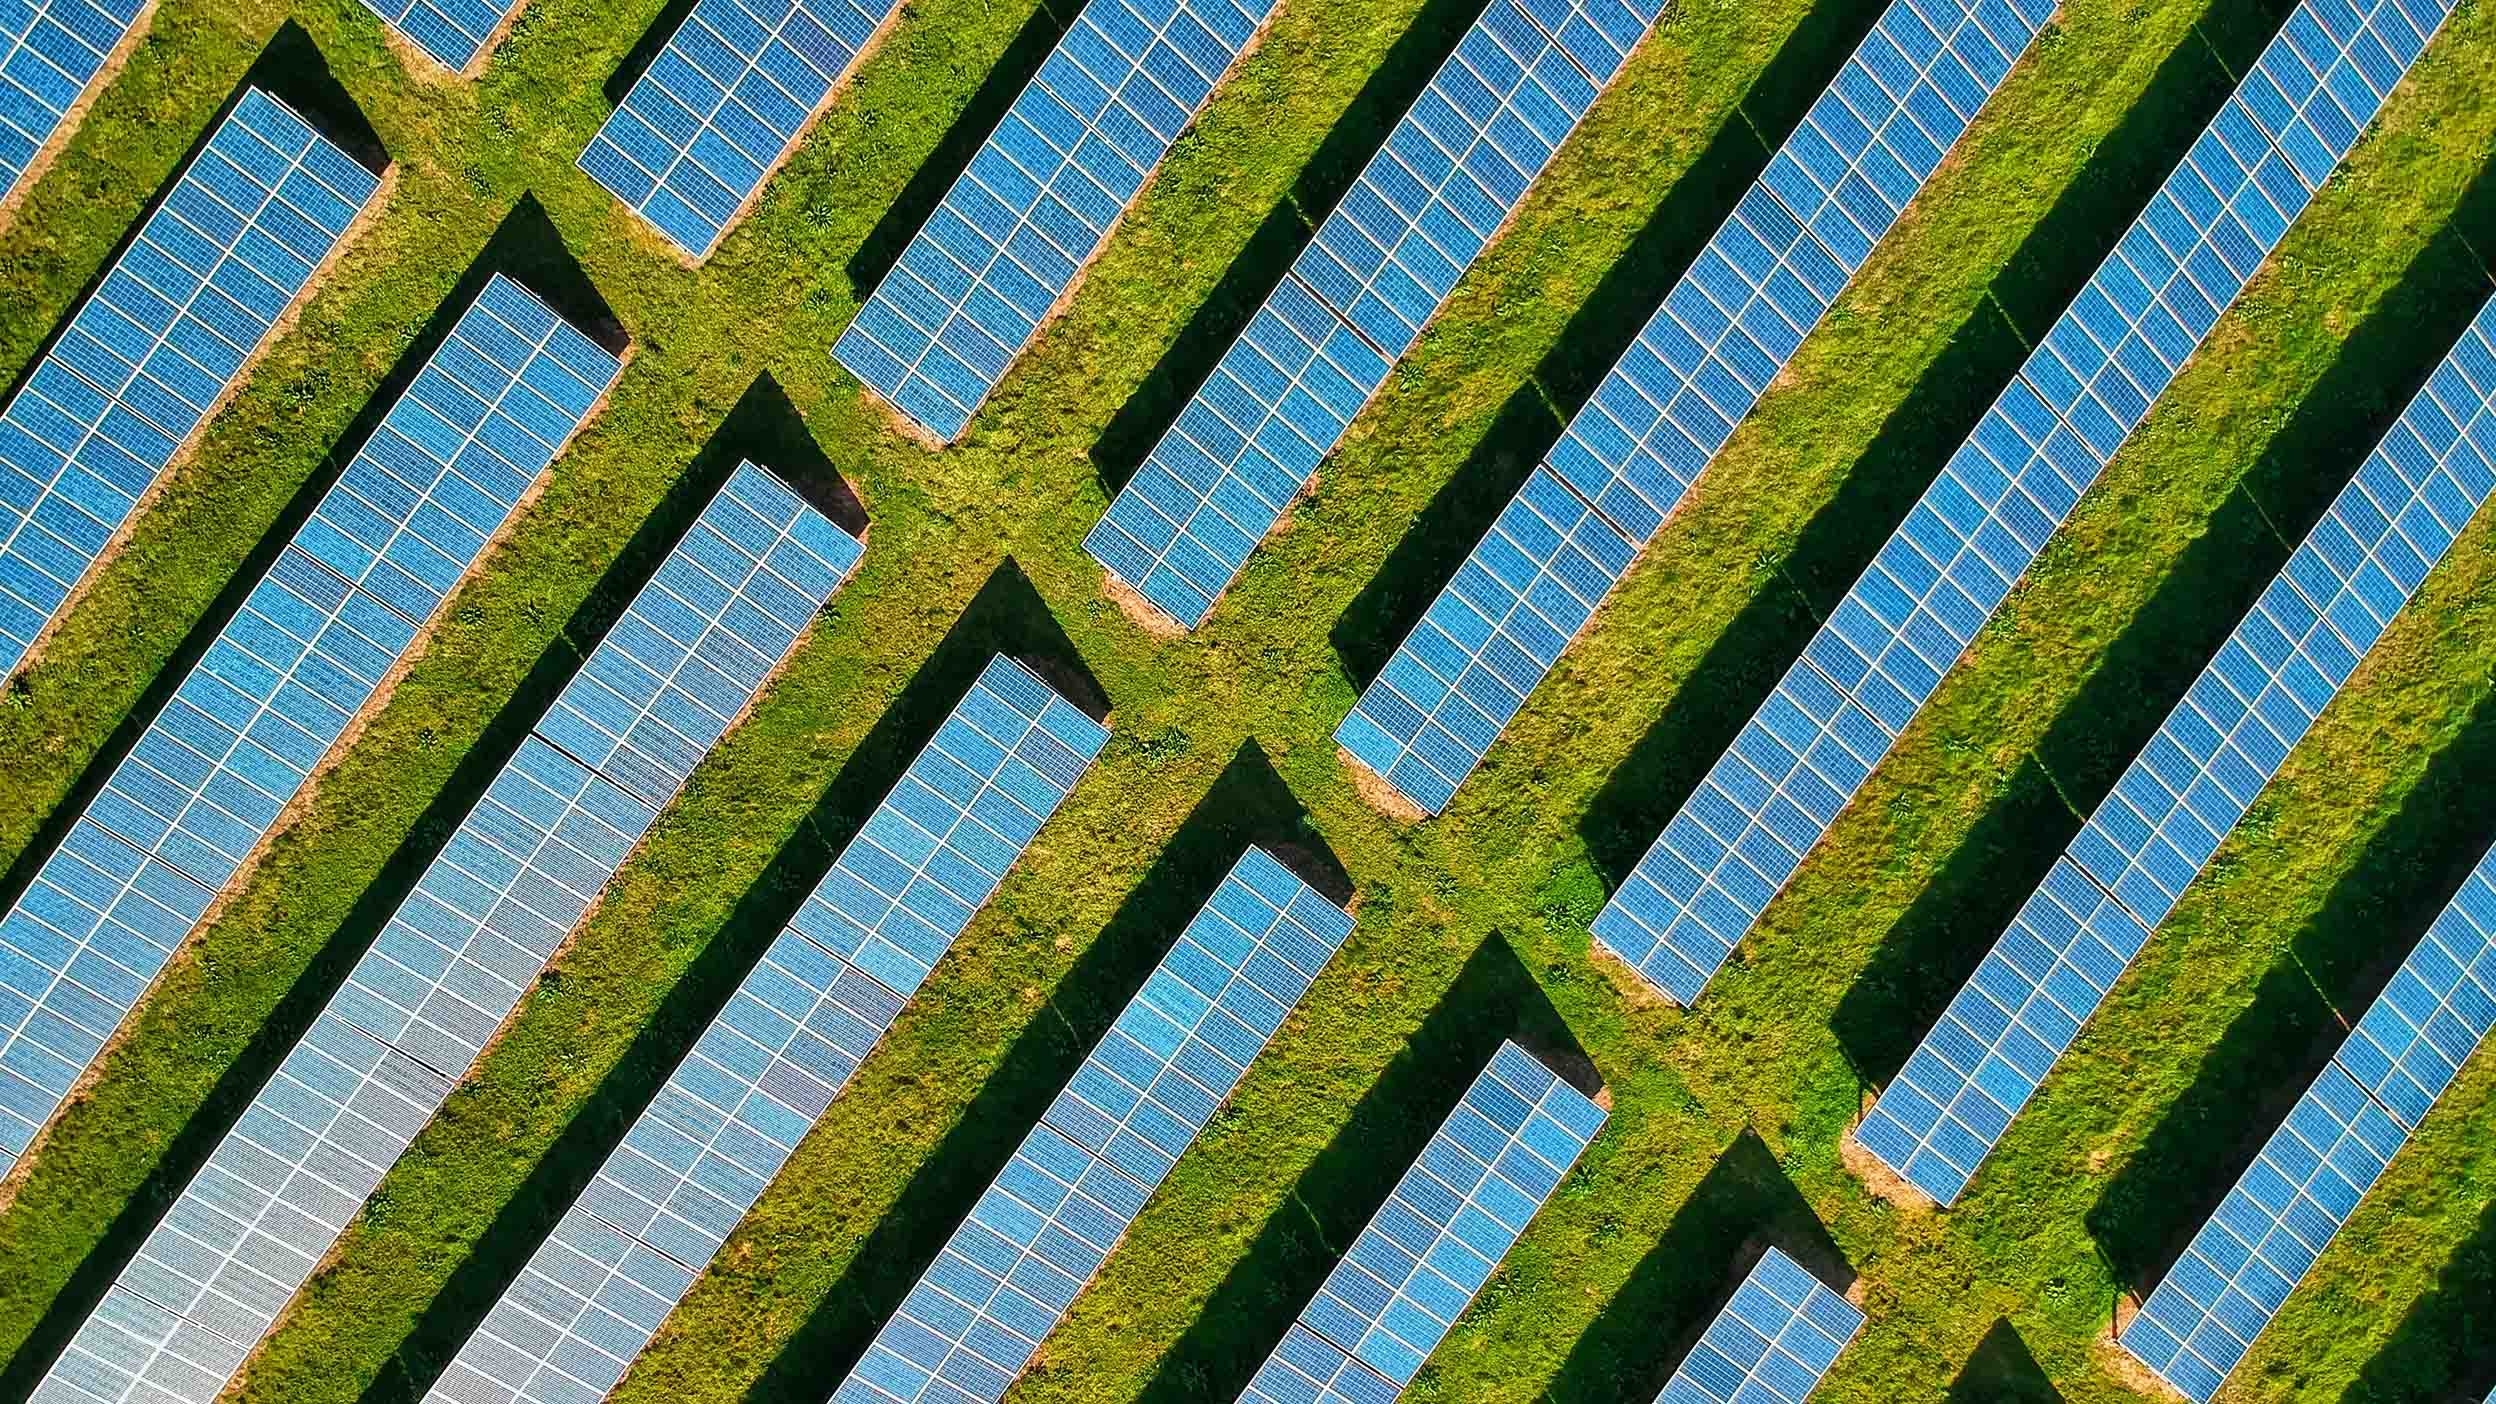 Green field with solar panels